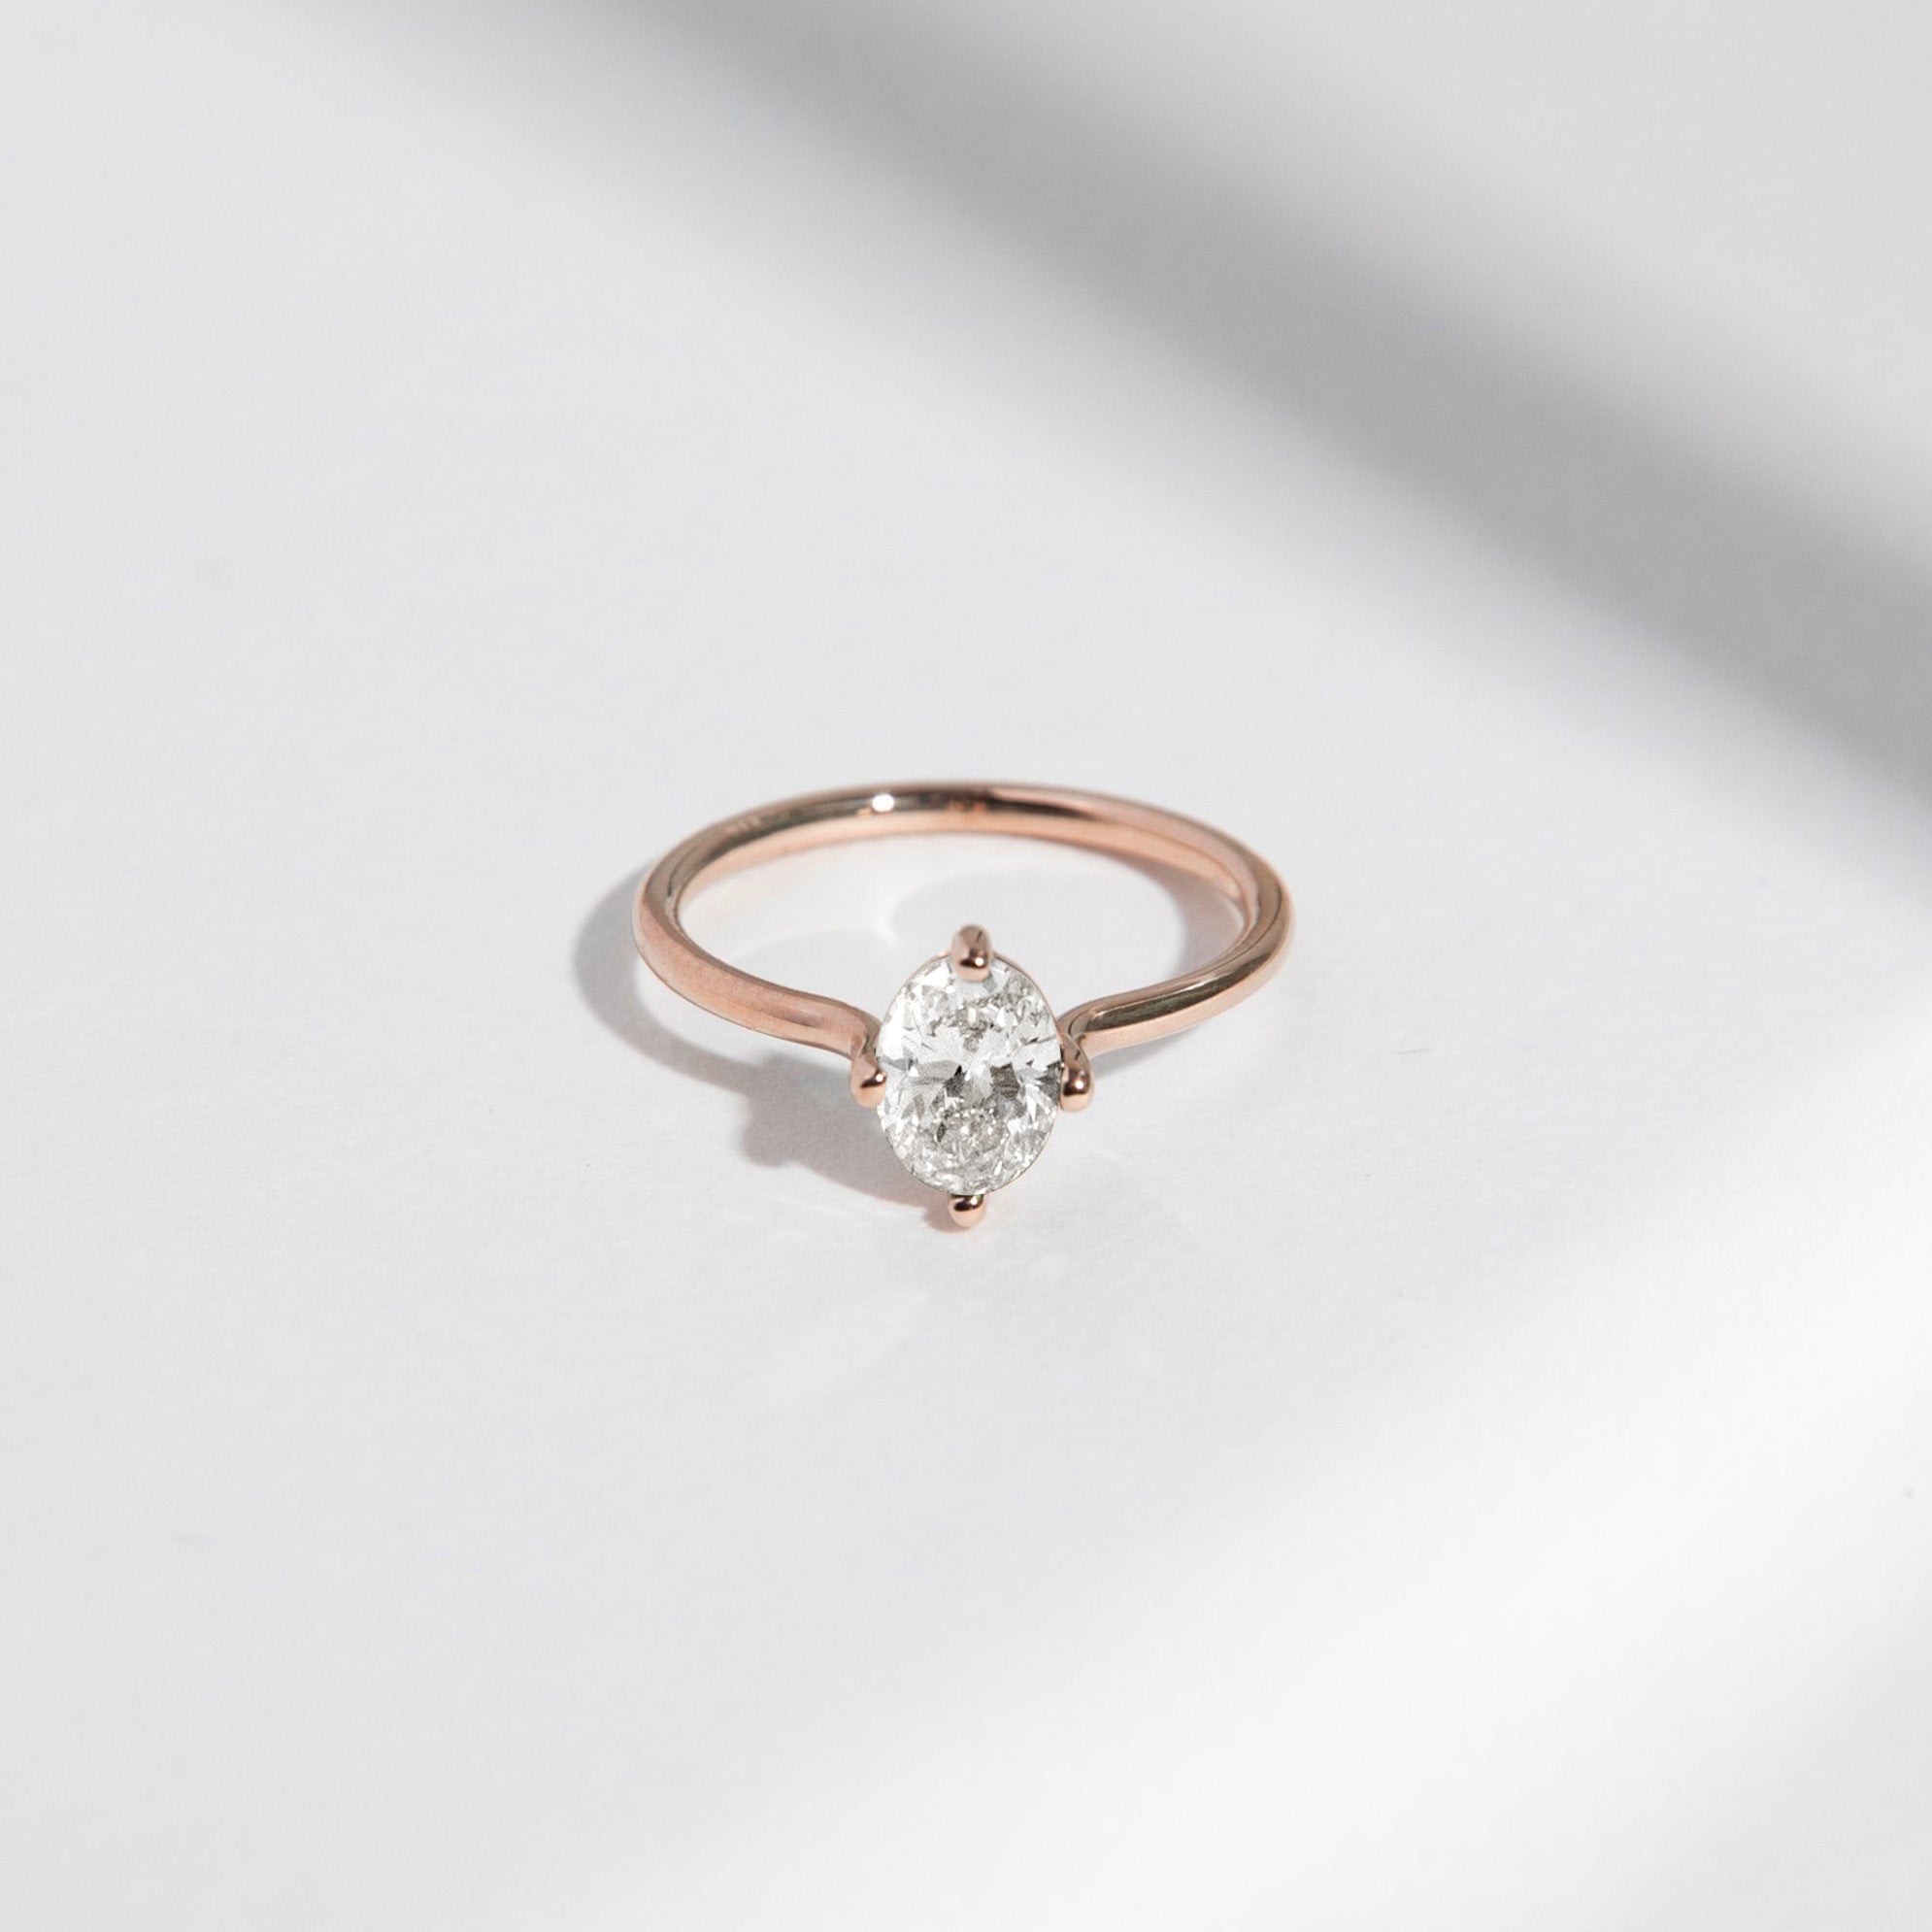 Veli Delicate Ring in 14k Rose Gold set with an oval brilliant cut lab-grown diamond By SHW Fine Jewelry NYC